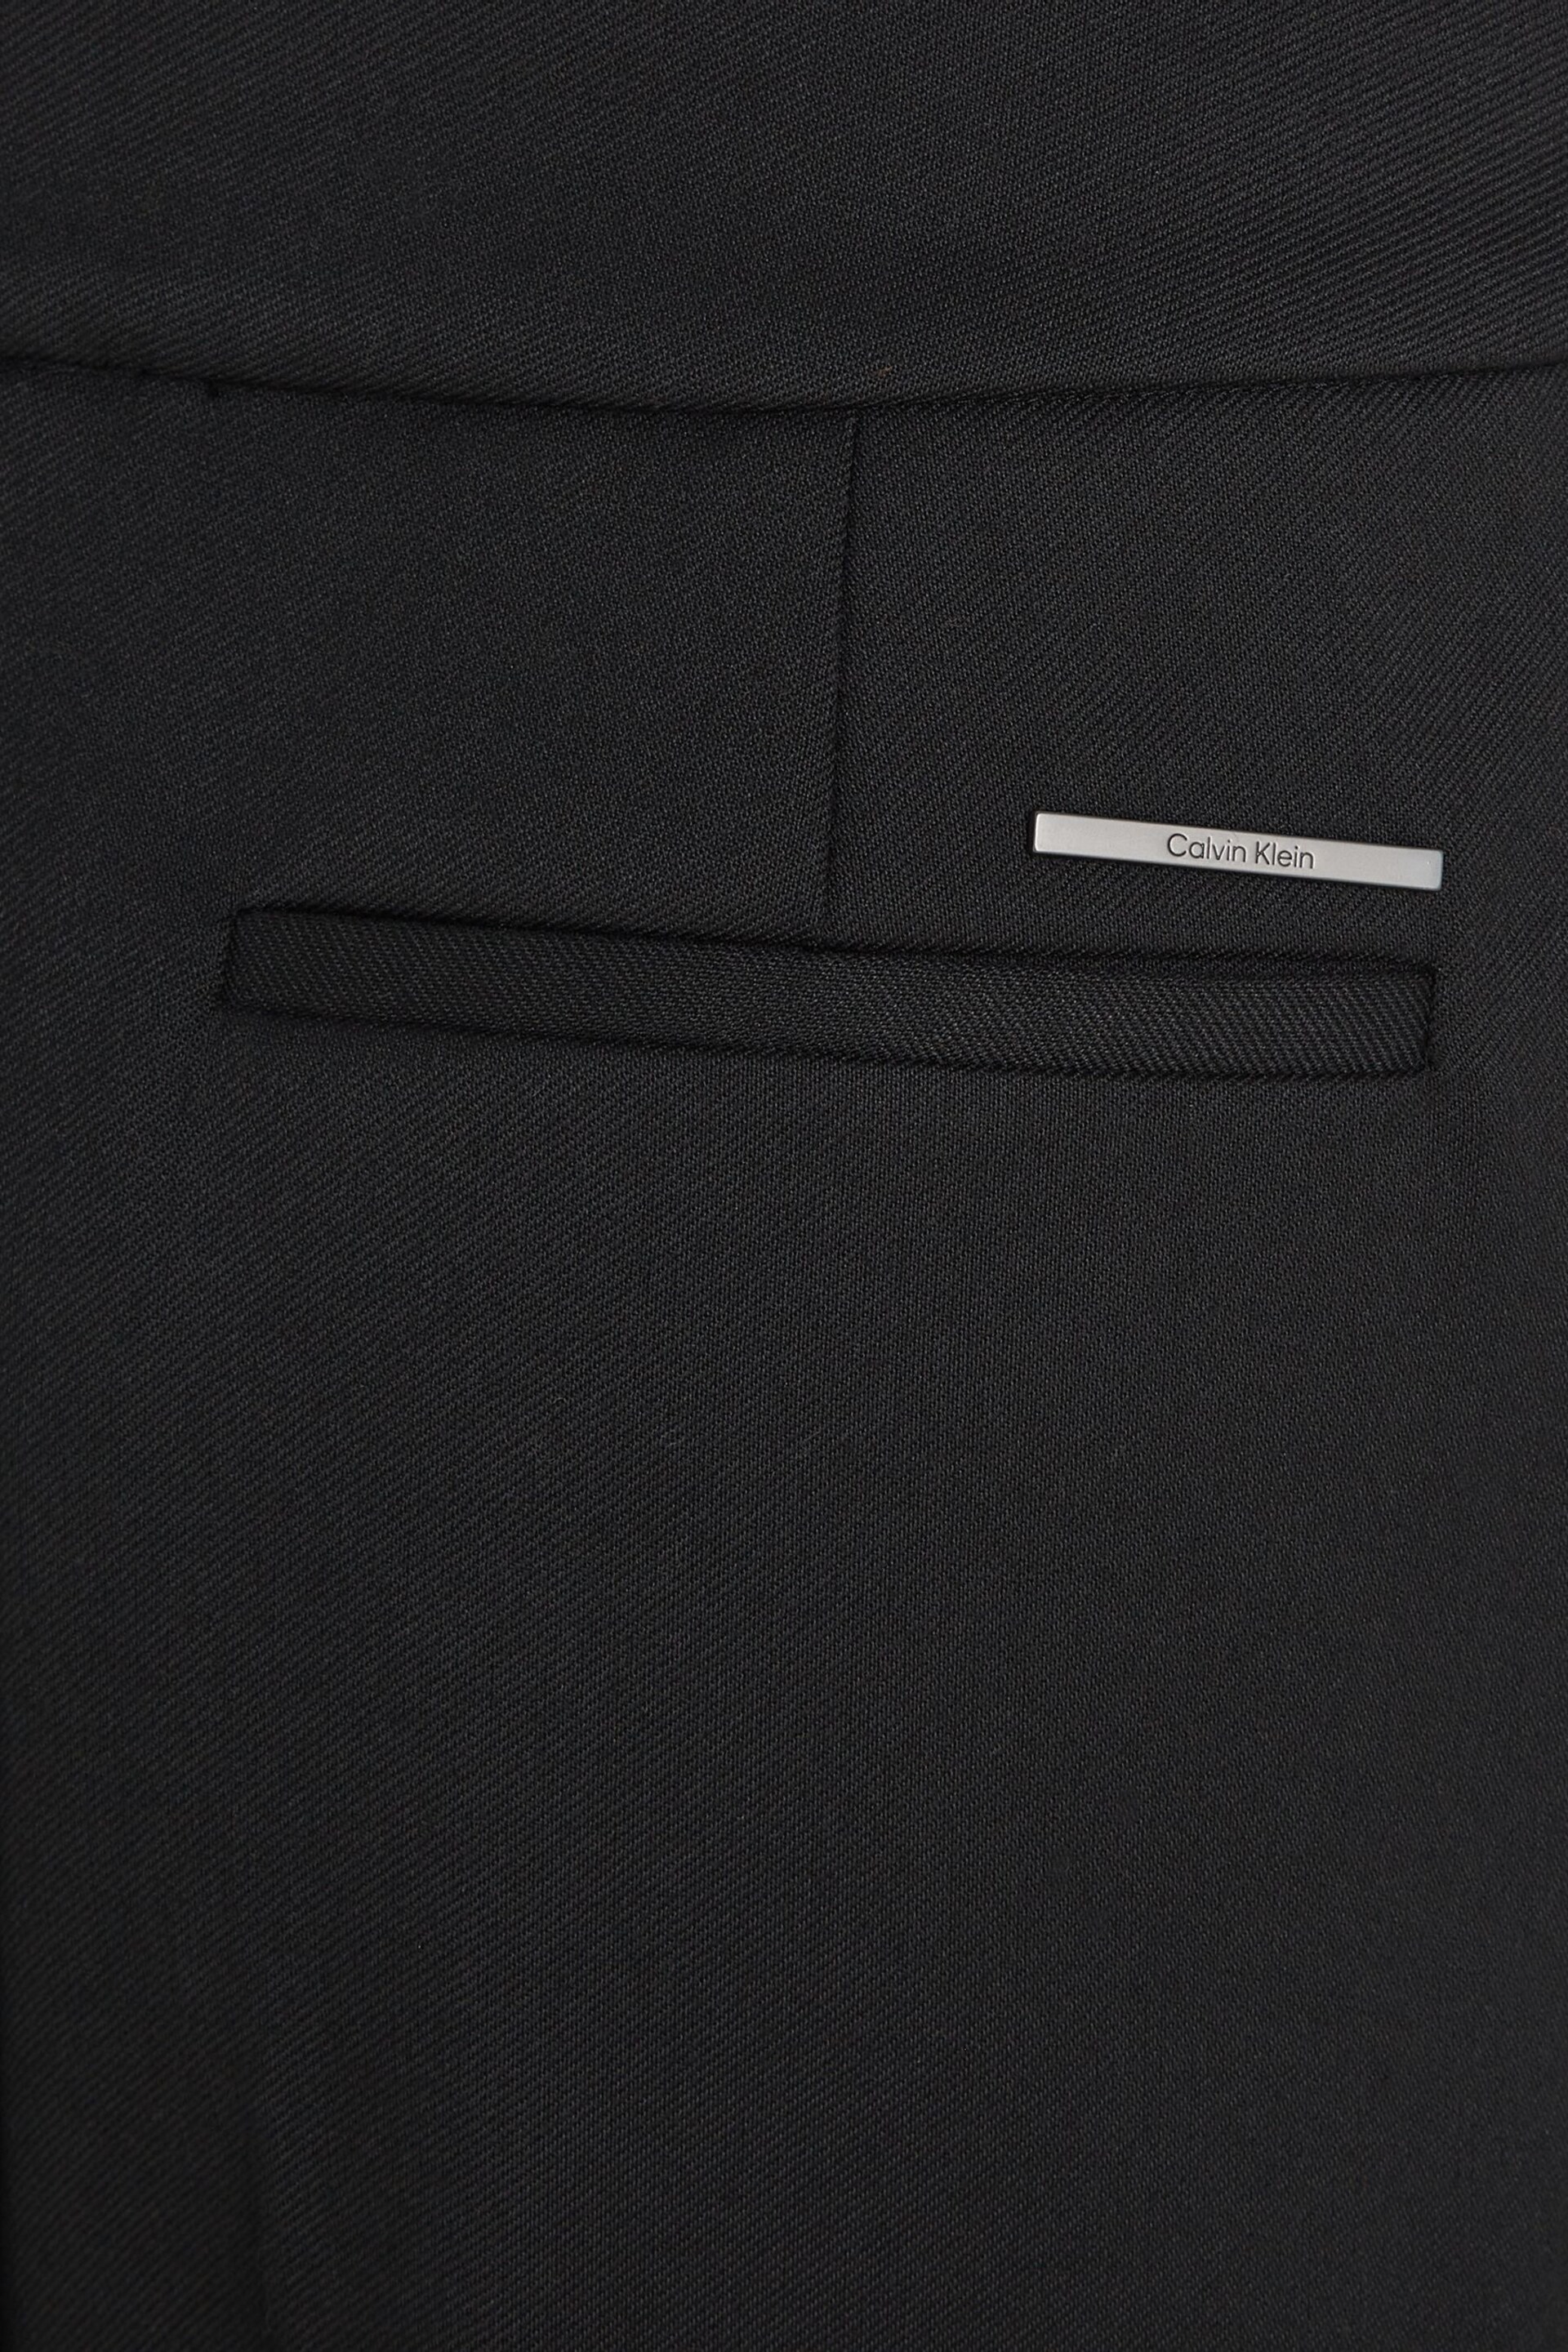 Calvin Klein Black Tailored Wide Leg Trousers - Image 6 of 6